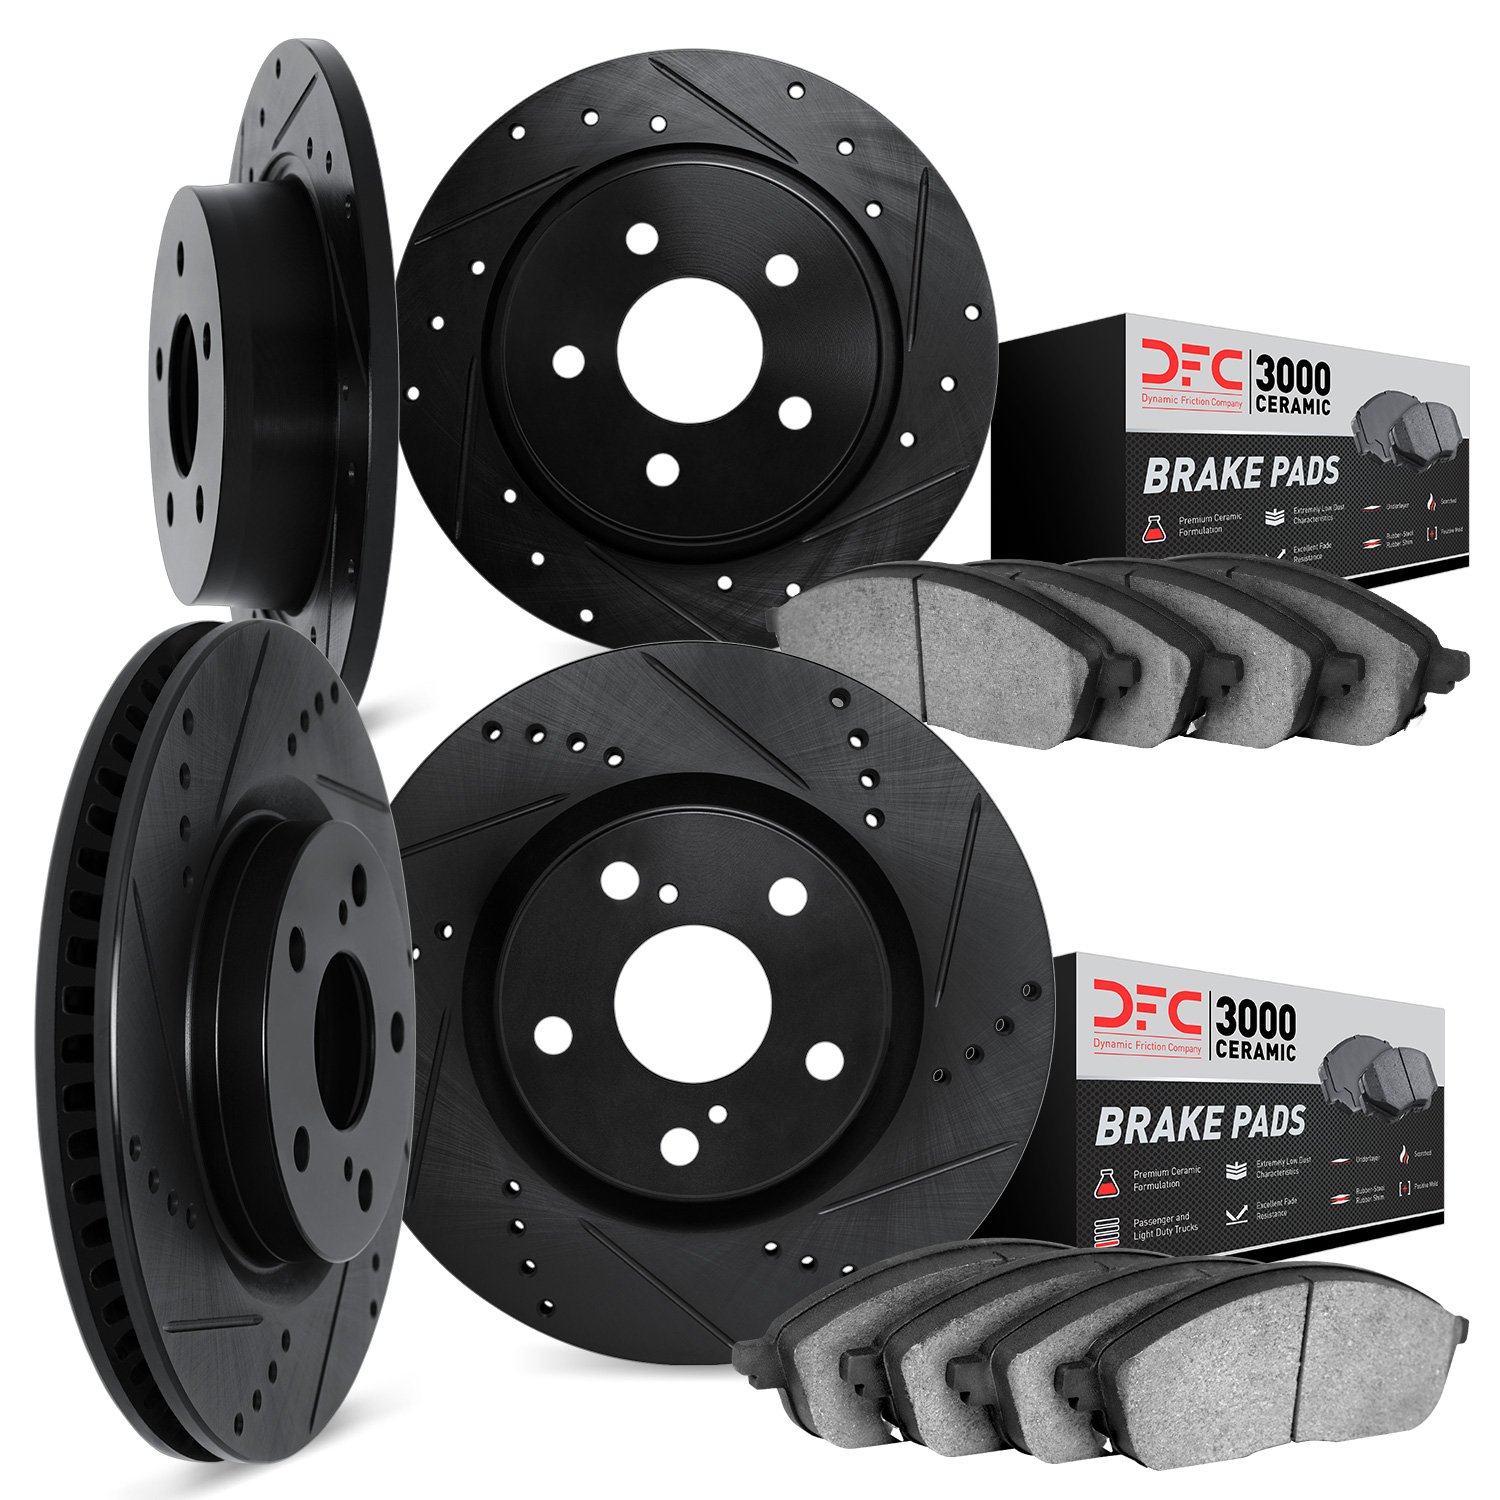 8304-59054 Drilled/Slotted Brake Rotors with 3000-Series Ceramic Brake Pads Kit [Black], 2001-2003 Acura/Honda, Position: Front